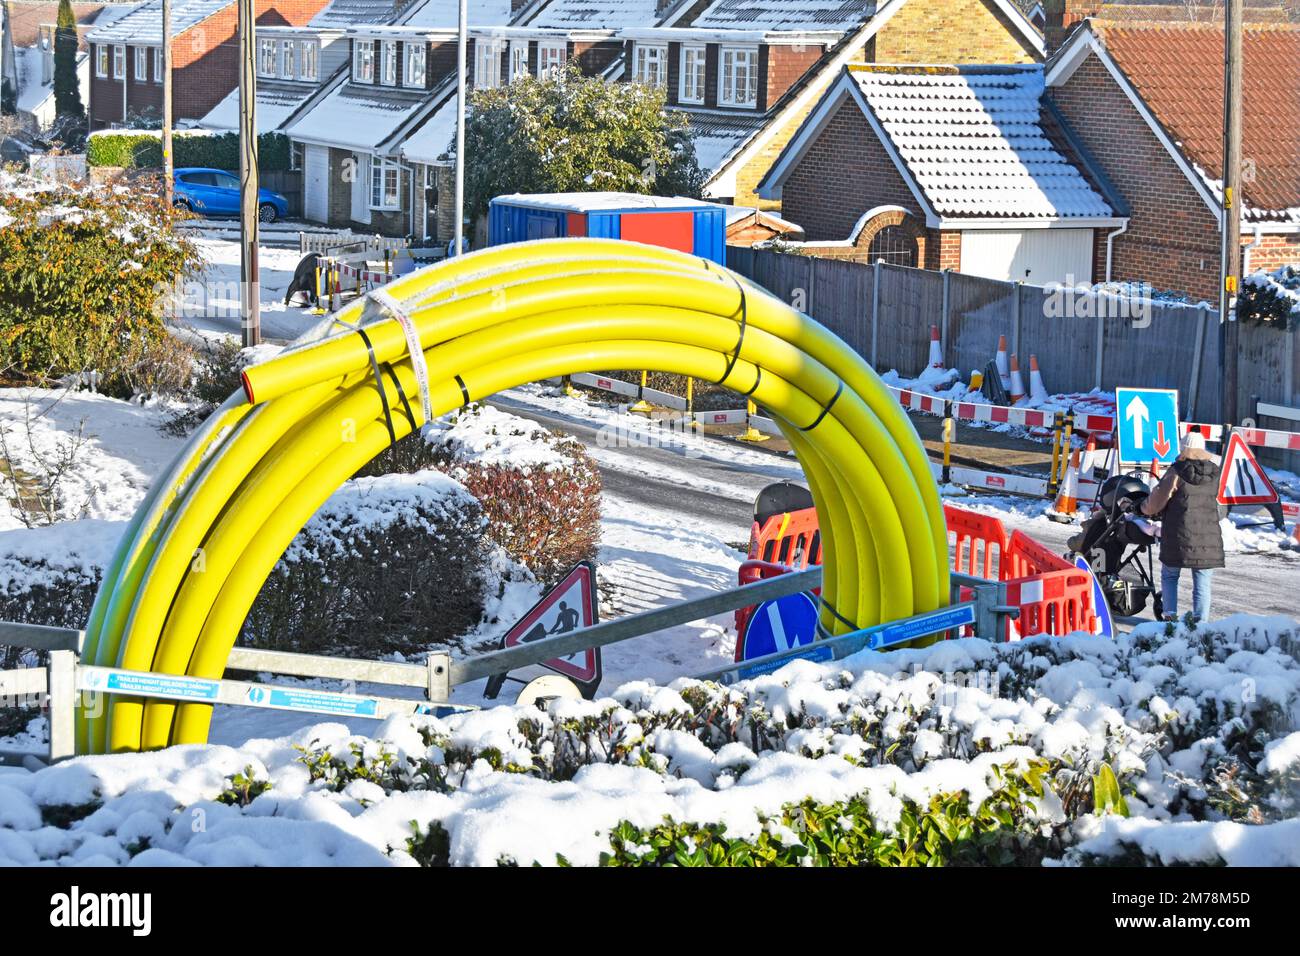 Winter snow mother pushes pram through shut down icy road works in residential village street passing large coiled up yellow gas main pipe England UK Stock Photo